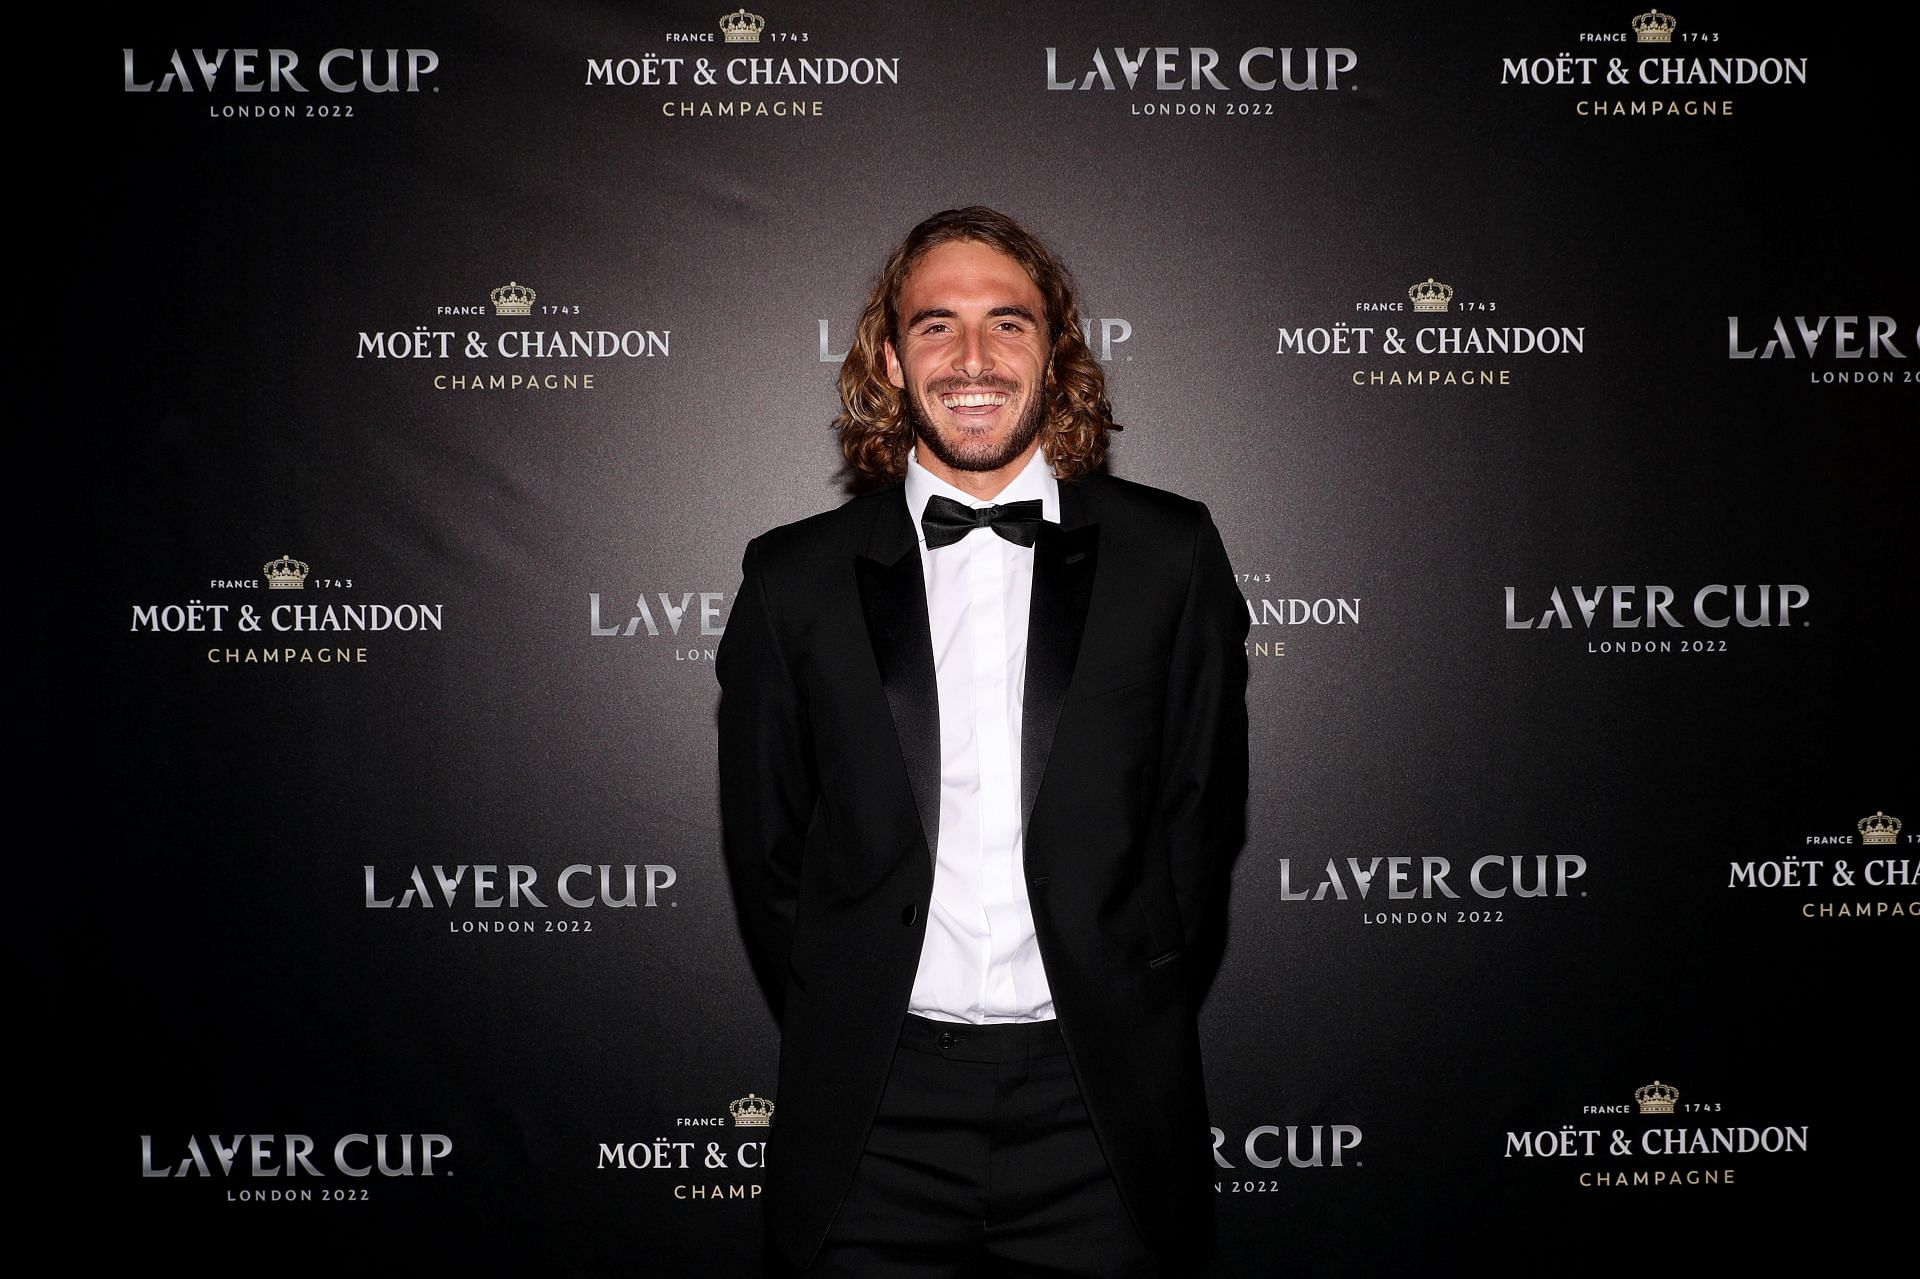 Stefanos Tsitsipas at the 2022 Laver Cup.